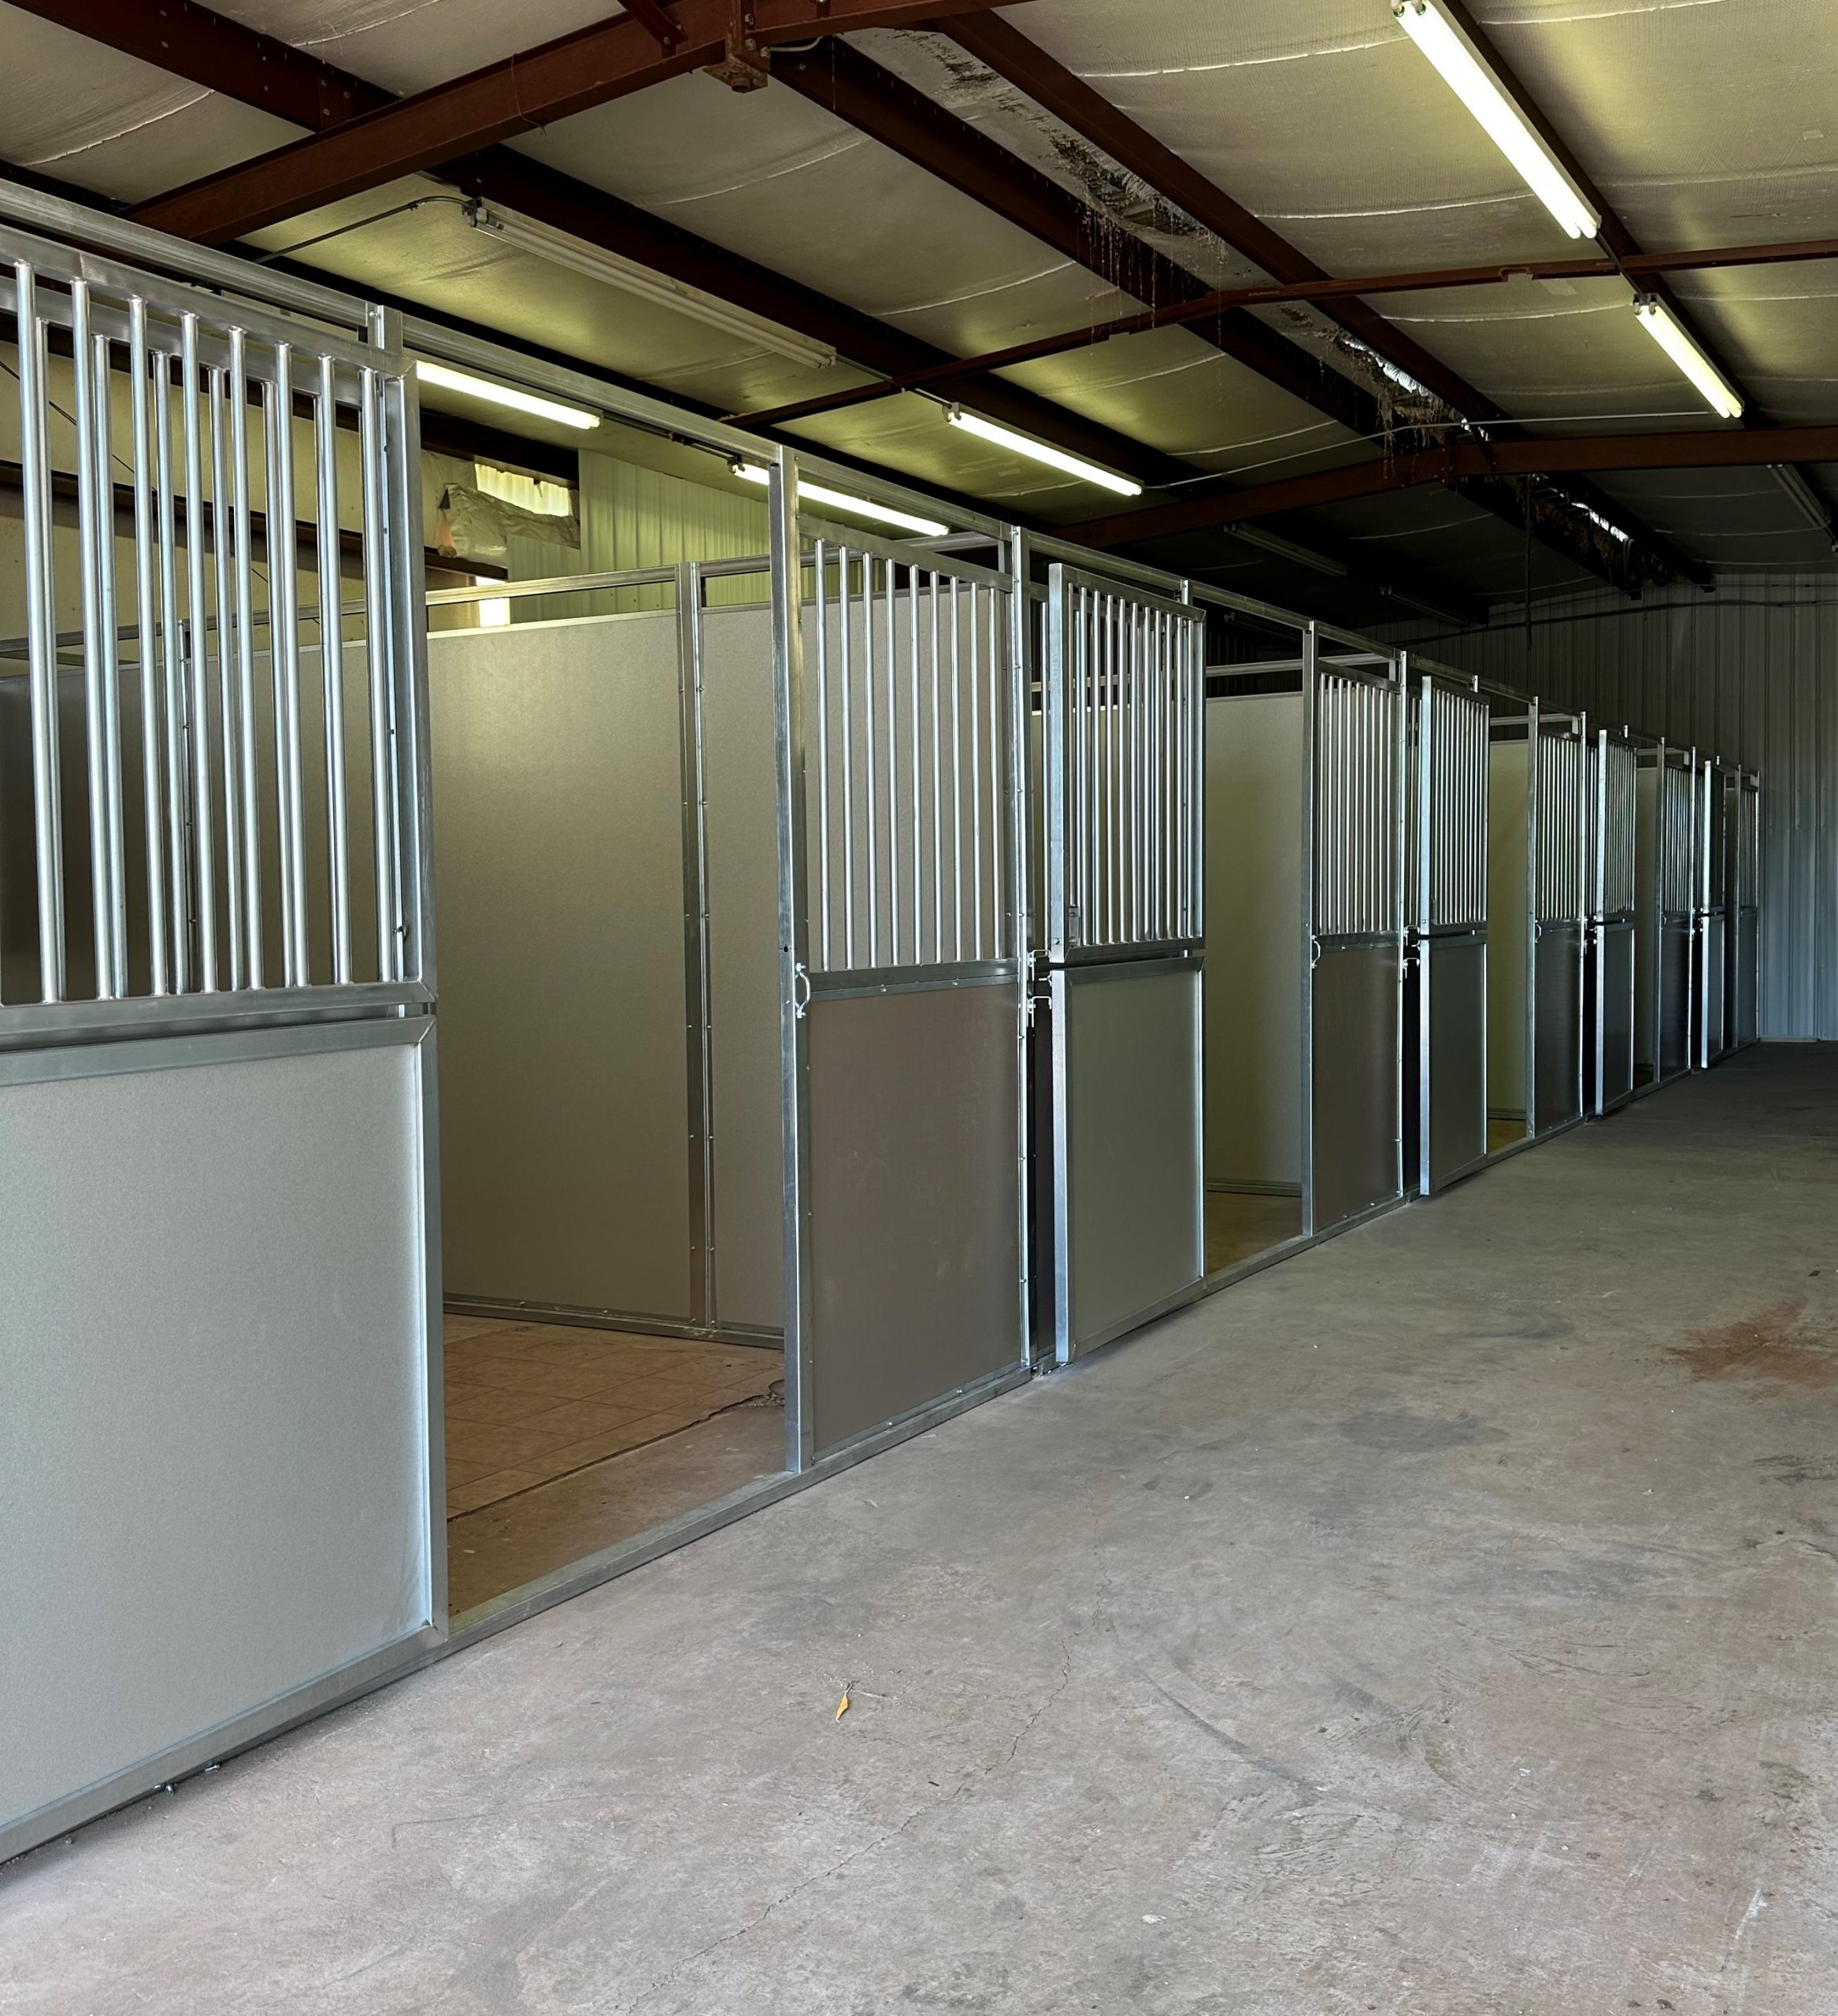 Housing many horses inside your barn is not stressful anymore as you keep adding stalls